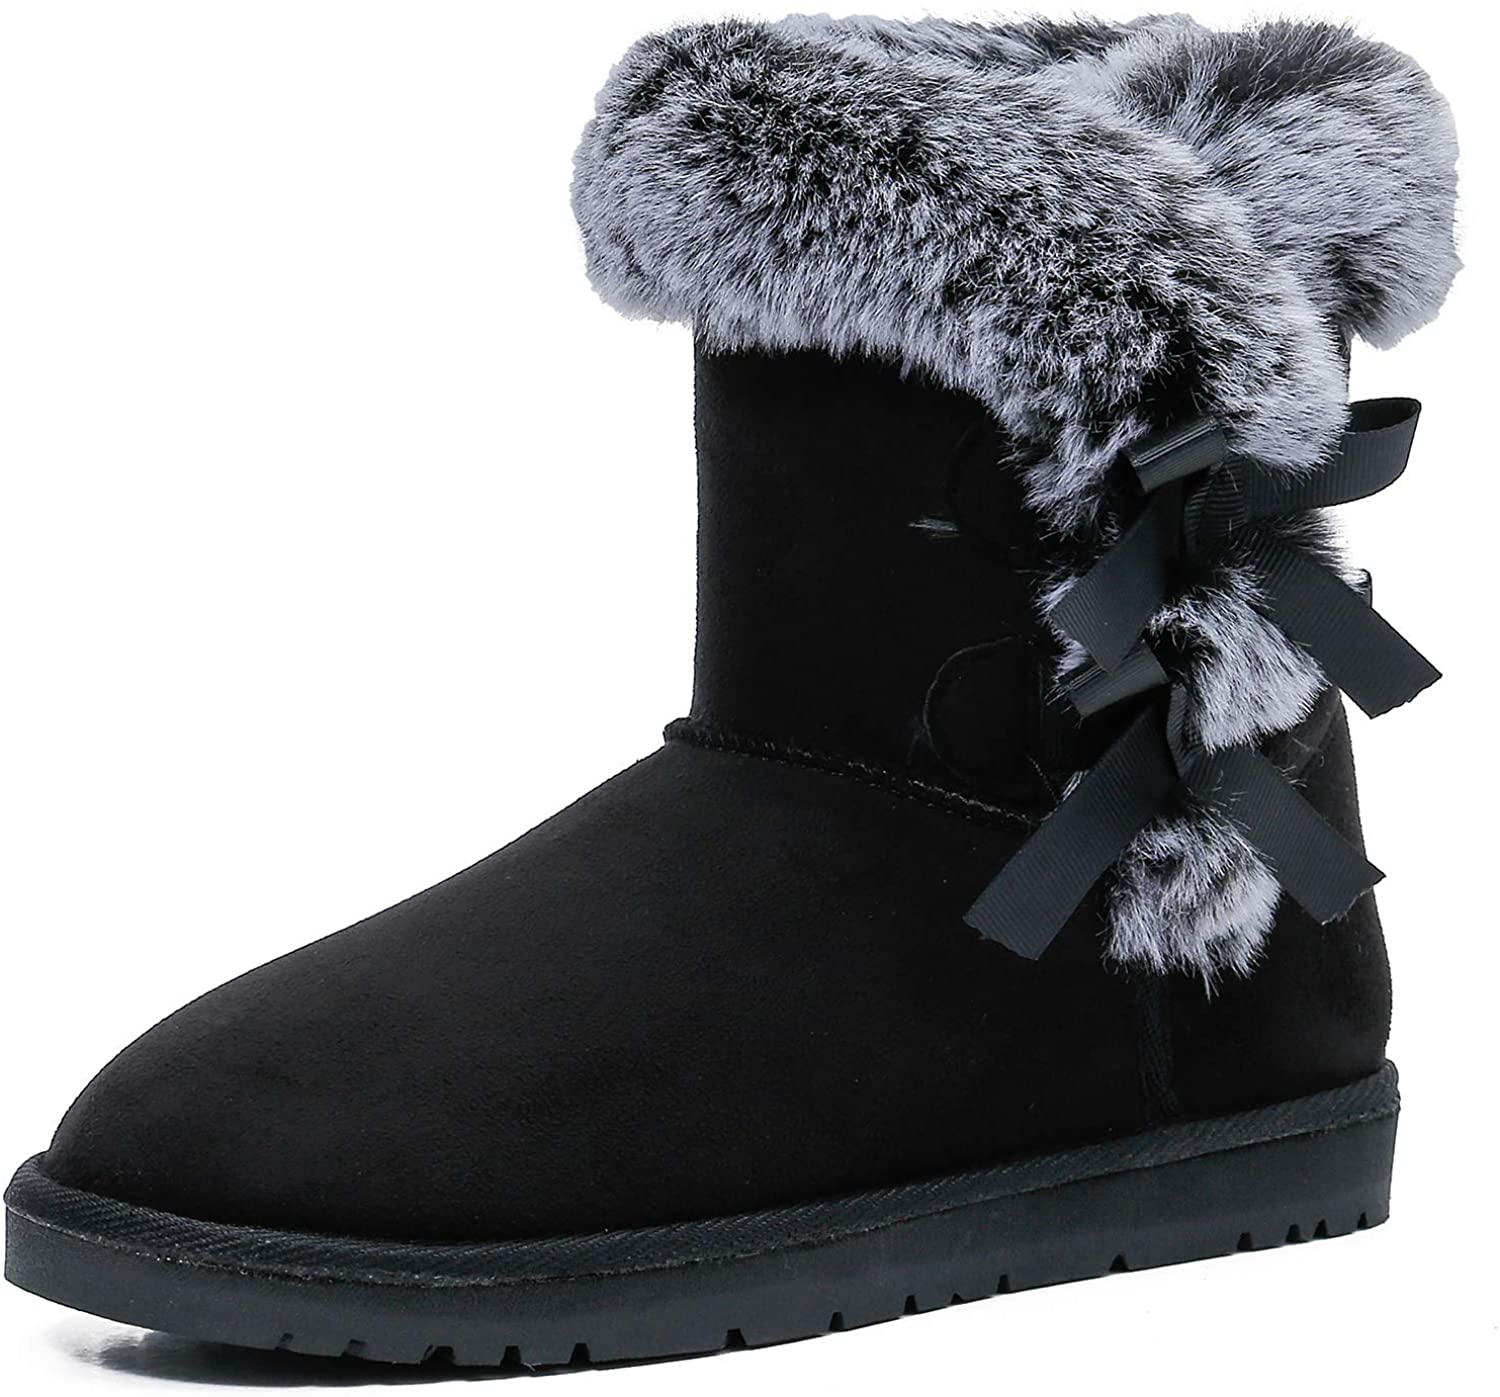 WFL Women's Snow Boots Mid Calf Fur Lining Winter Classic Boots